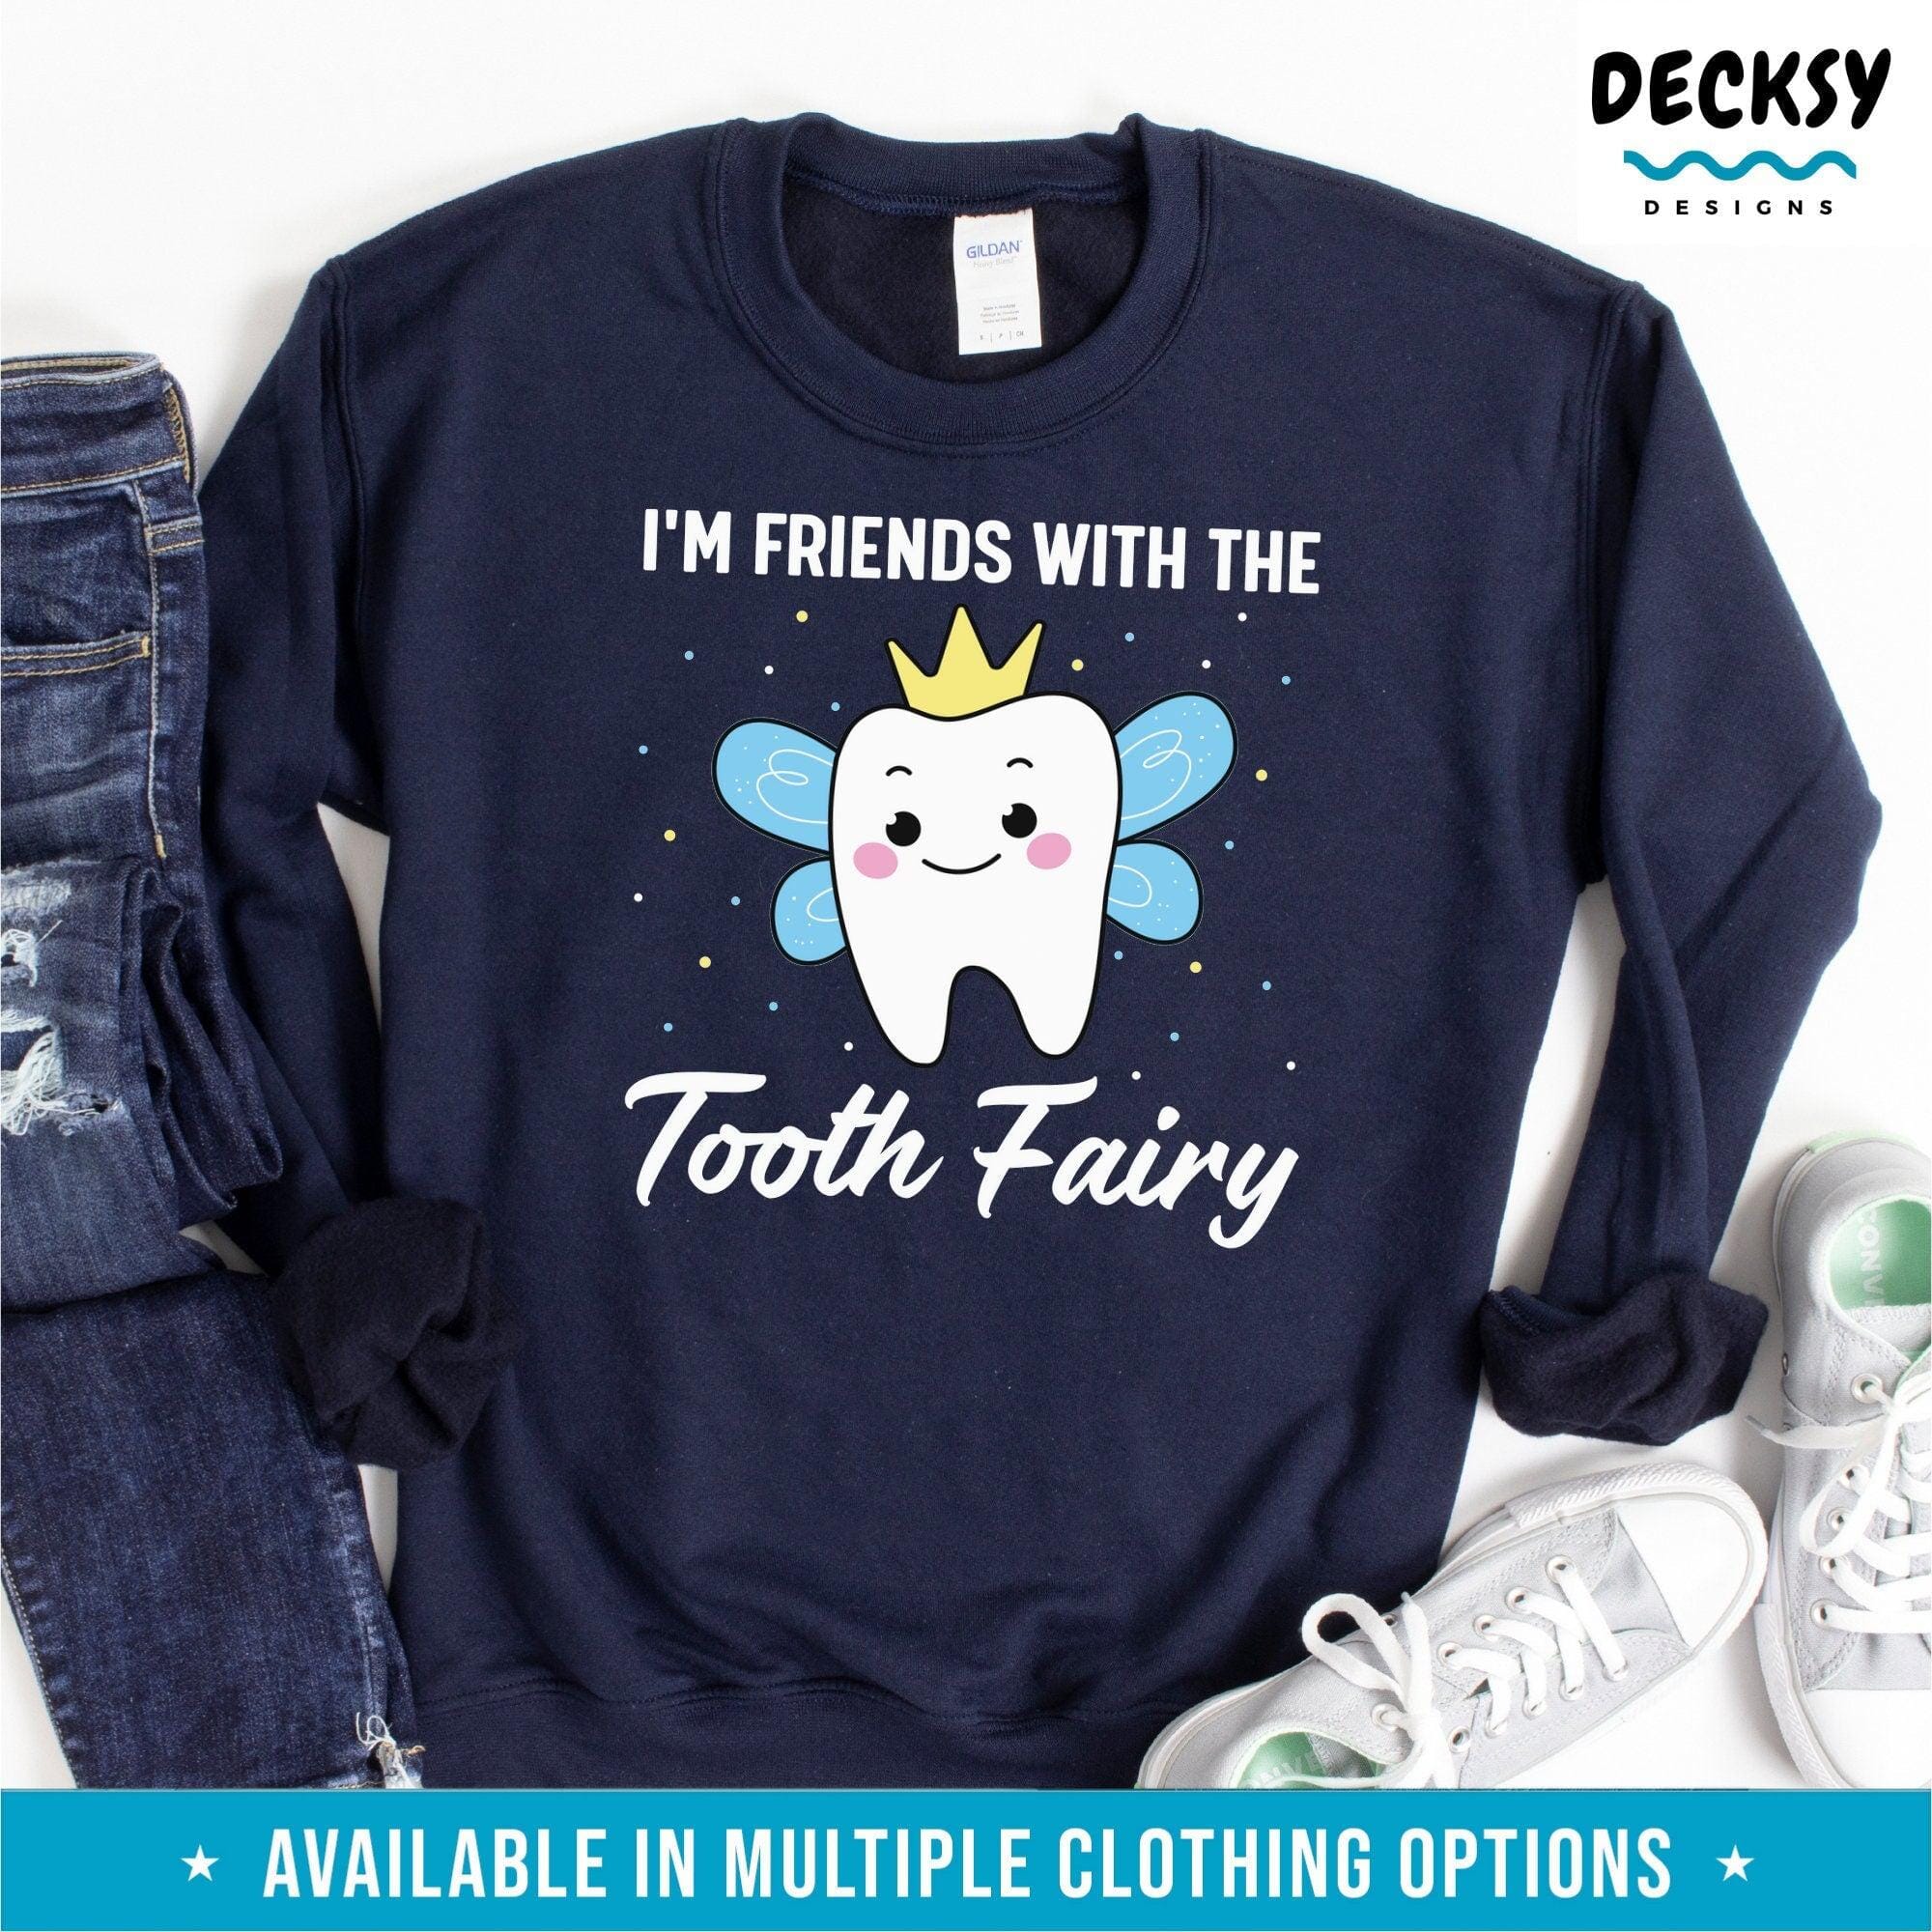 Tooth Fairy Shirt, Funny Dentist Gift-Clothing:Gender-Neutral Adult Clothing:Tops & Tees:T-shirts:Graphic Tees-DecksyDesigns